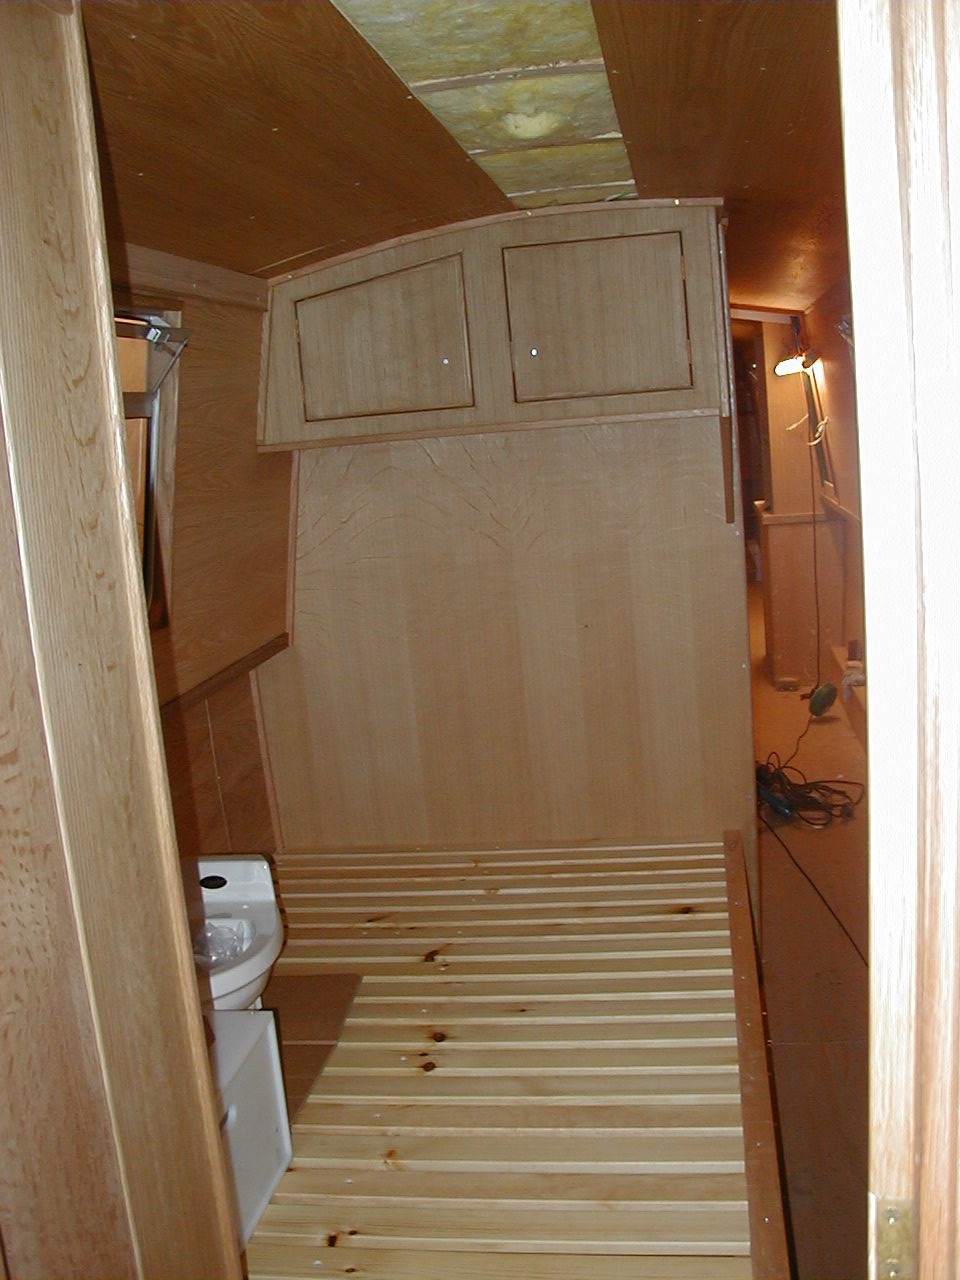 The bedroom starts to take shape. At last we can begin to imagine living onboard. We had Barry make 2 sets of drawers under the bed - one set in front of the other for extra storage. This space was created by having an elsan type toilet rather than the storage tank/pump out type.